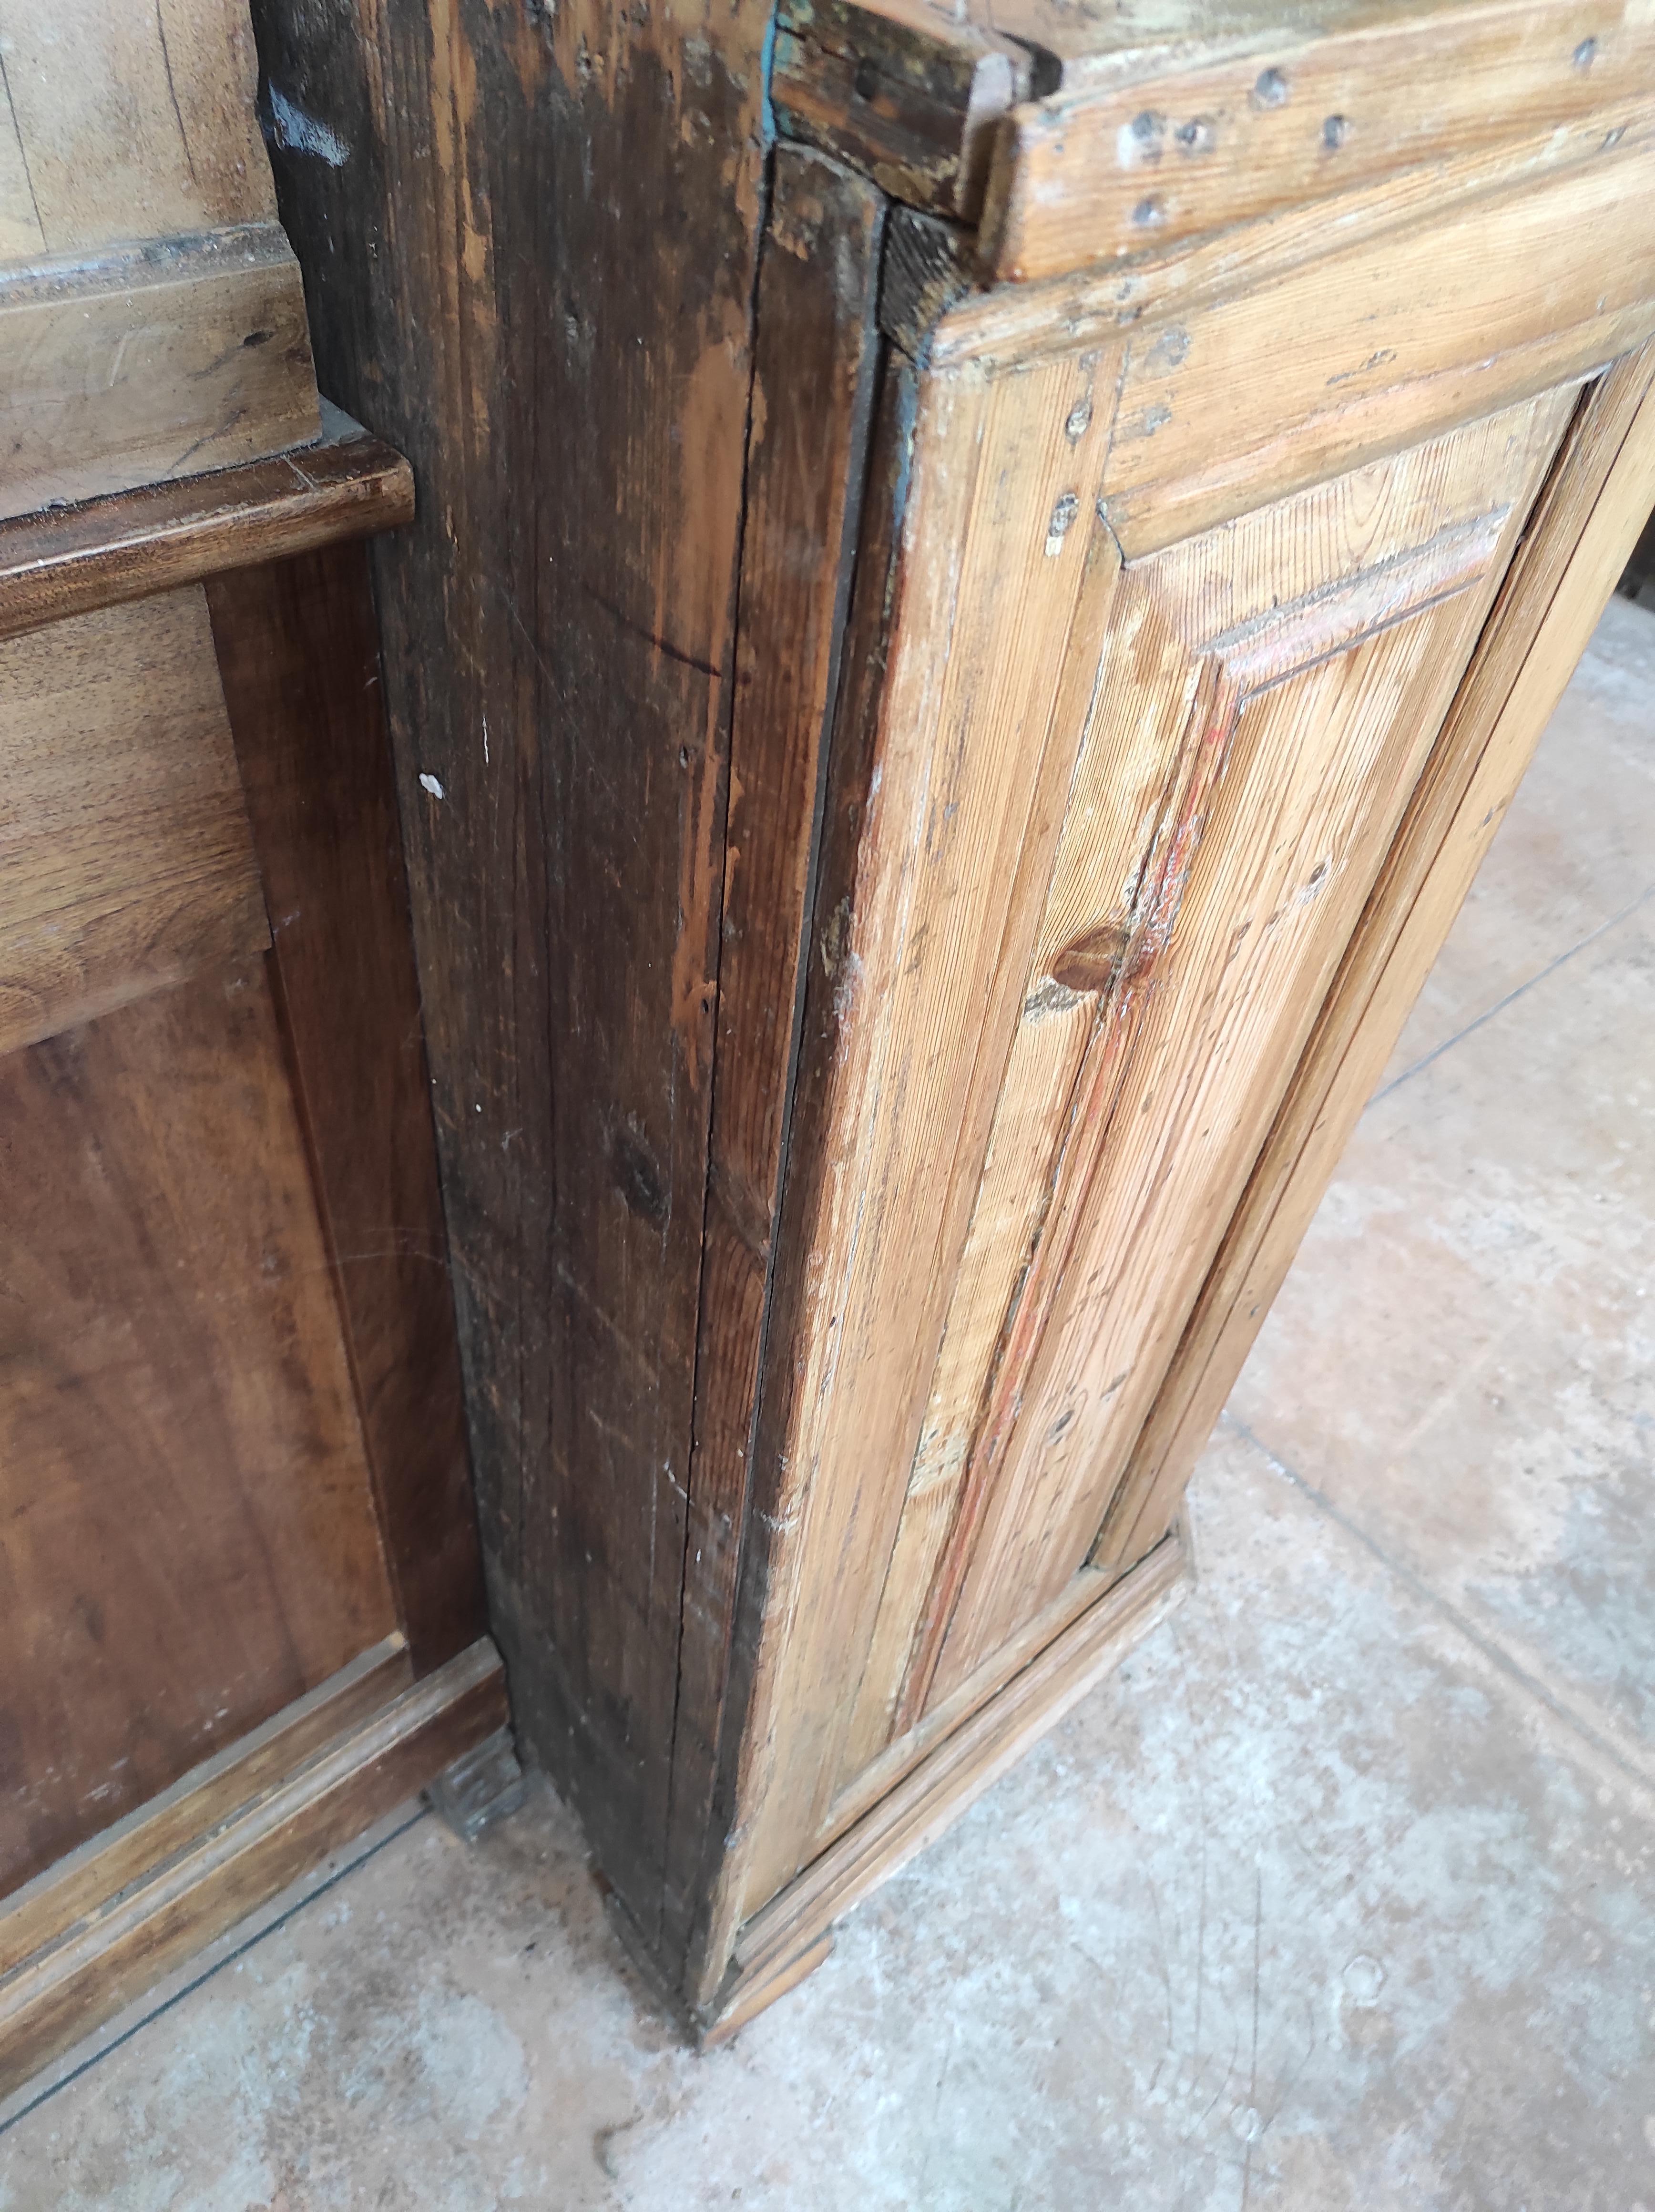 Rustic corner piece made of fir wood.
Very distinctive shape that gives the cabinet maximum capacity.
Period late 1800s Trent origin.
It was bought in Italy in a Brescia villa but its style suggests it belonged to a mountain resistance.
I believe it